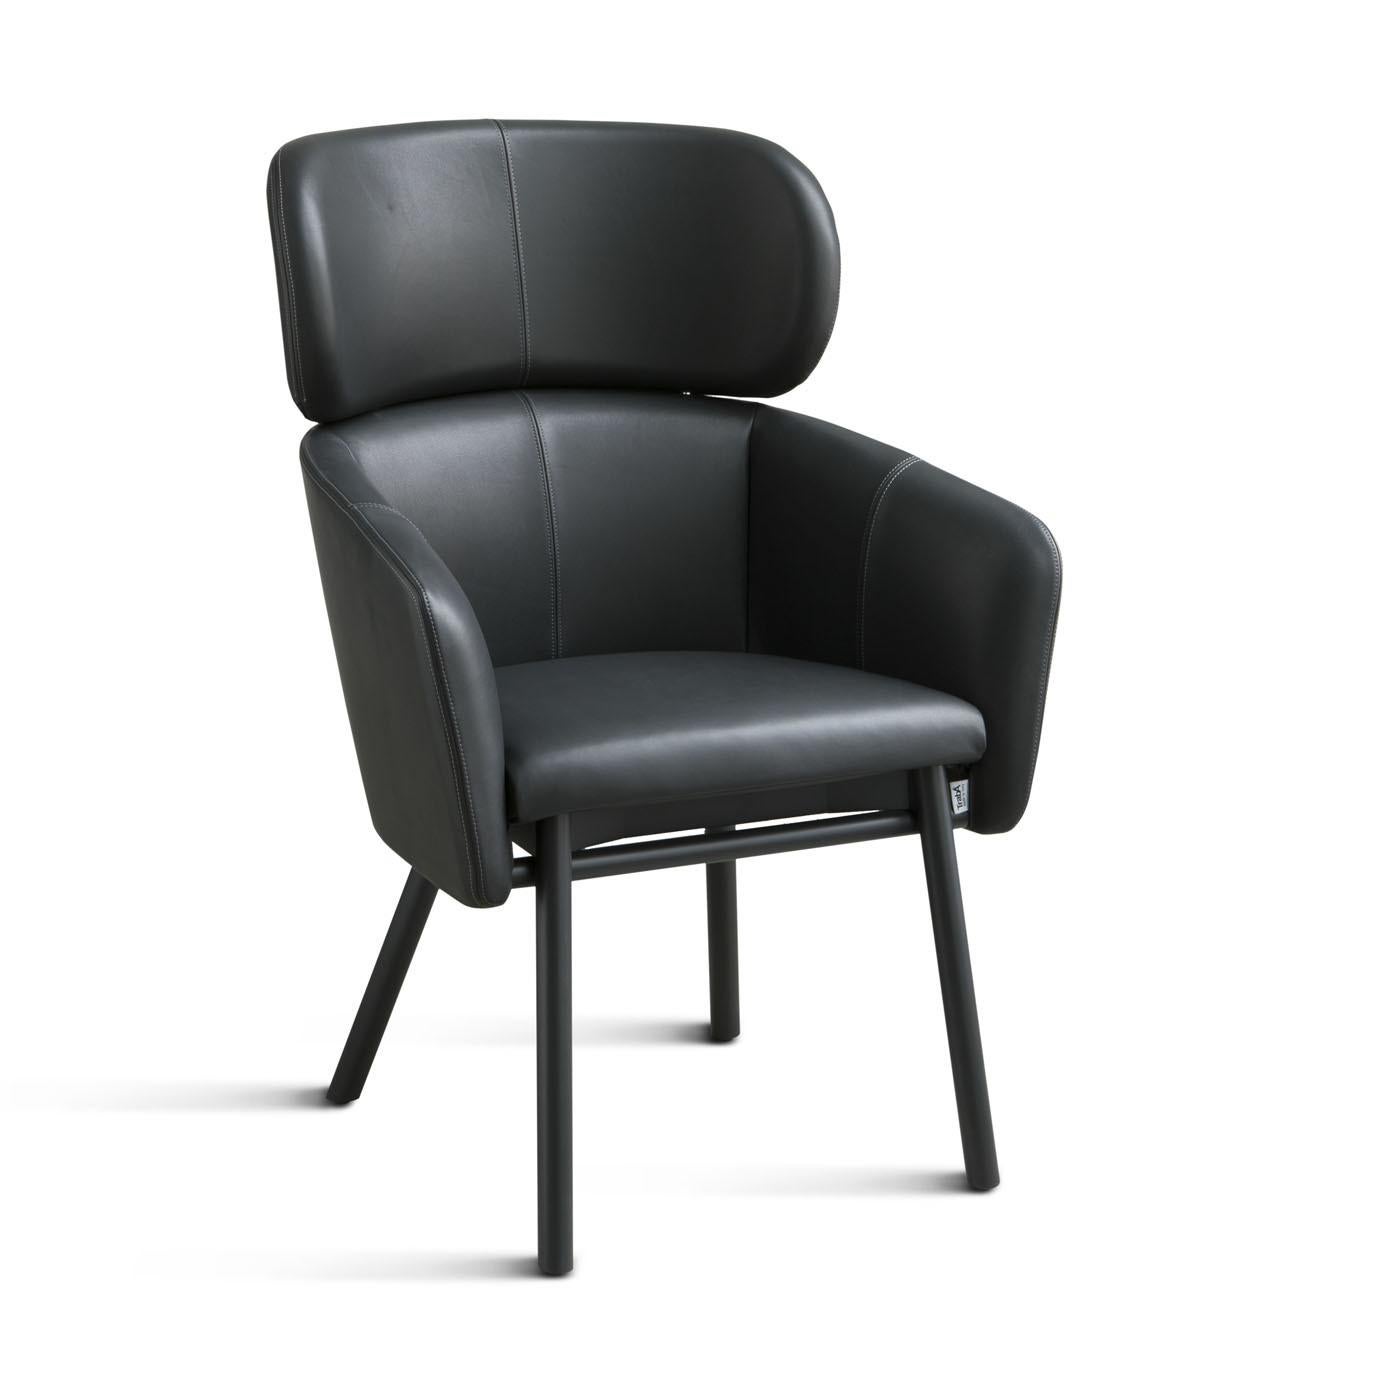 Boasting minimalism and clean design, this chair is a modular and larger version of the refined Balù chair designed by Emilio Nanni. Comfortable and elegant, it features a black-lacquered beechwood structure with slanted legs, and a soft seat with